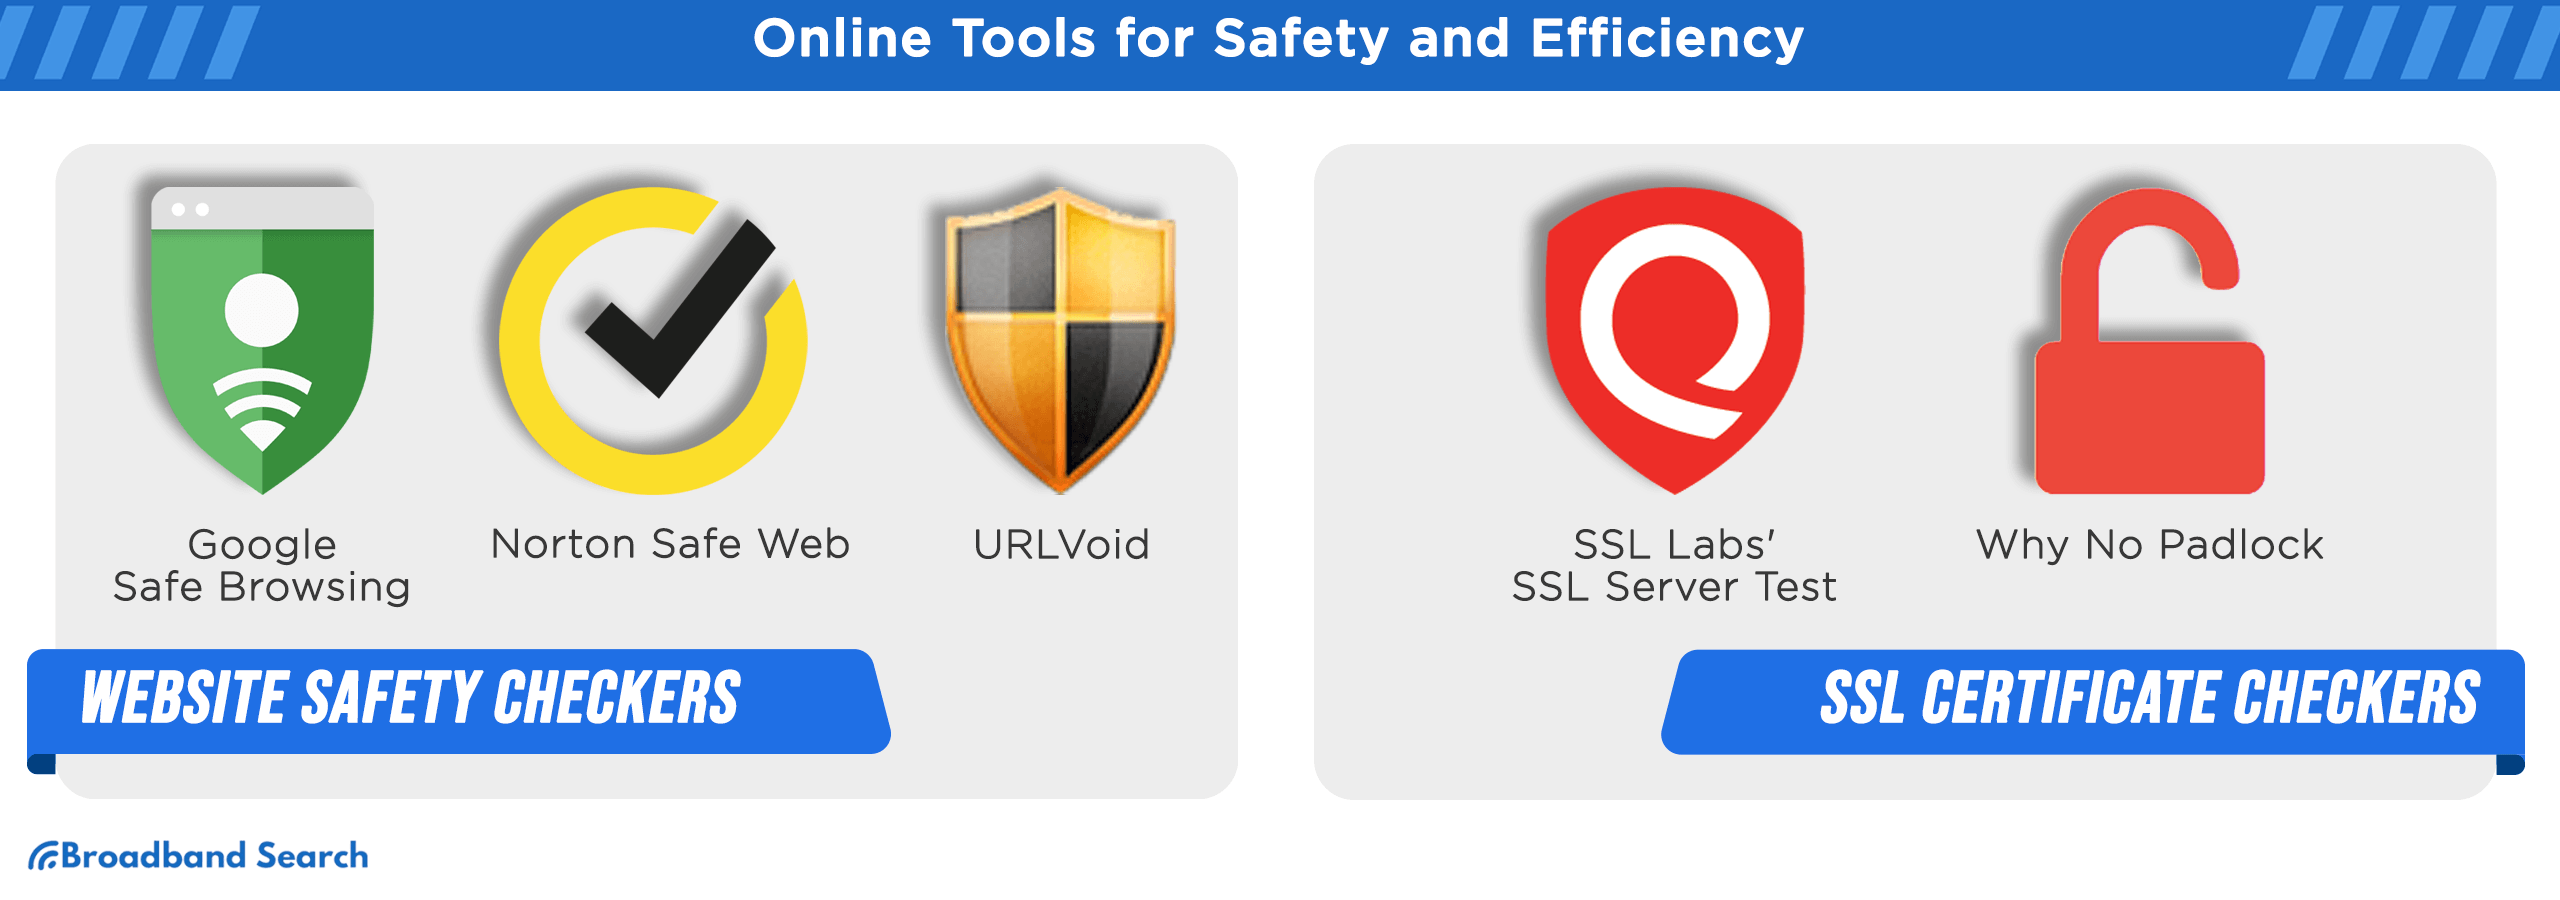 Online tools for safety and efficiency